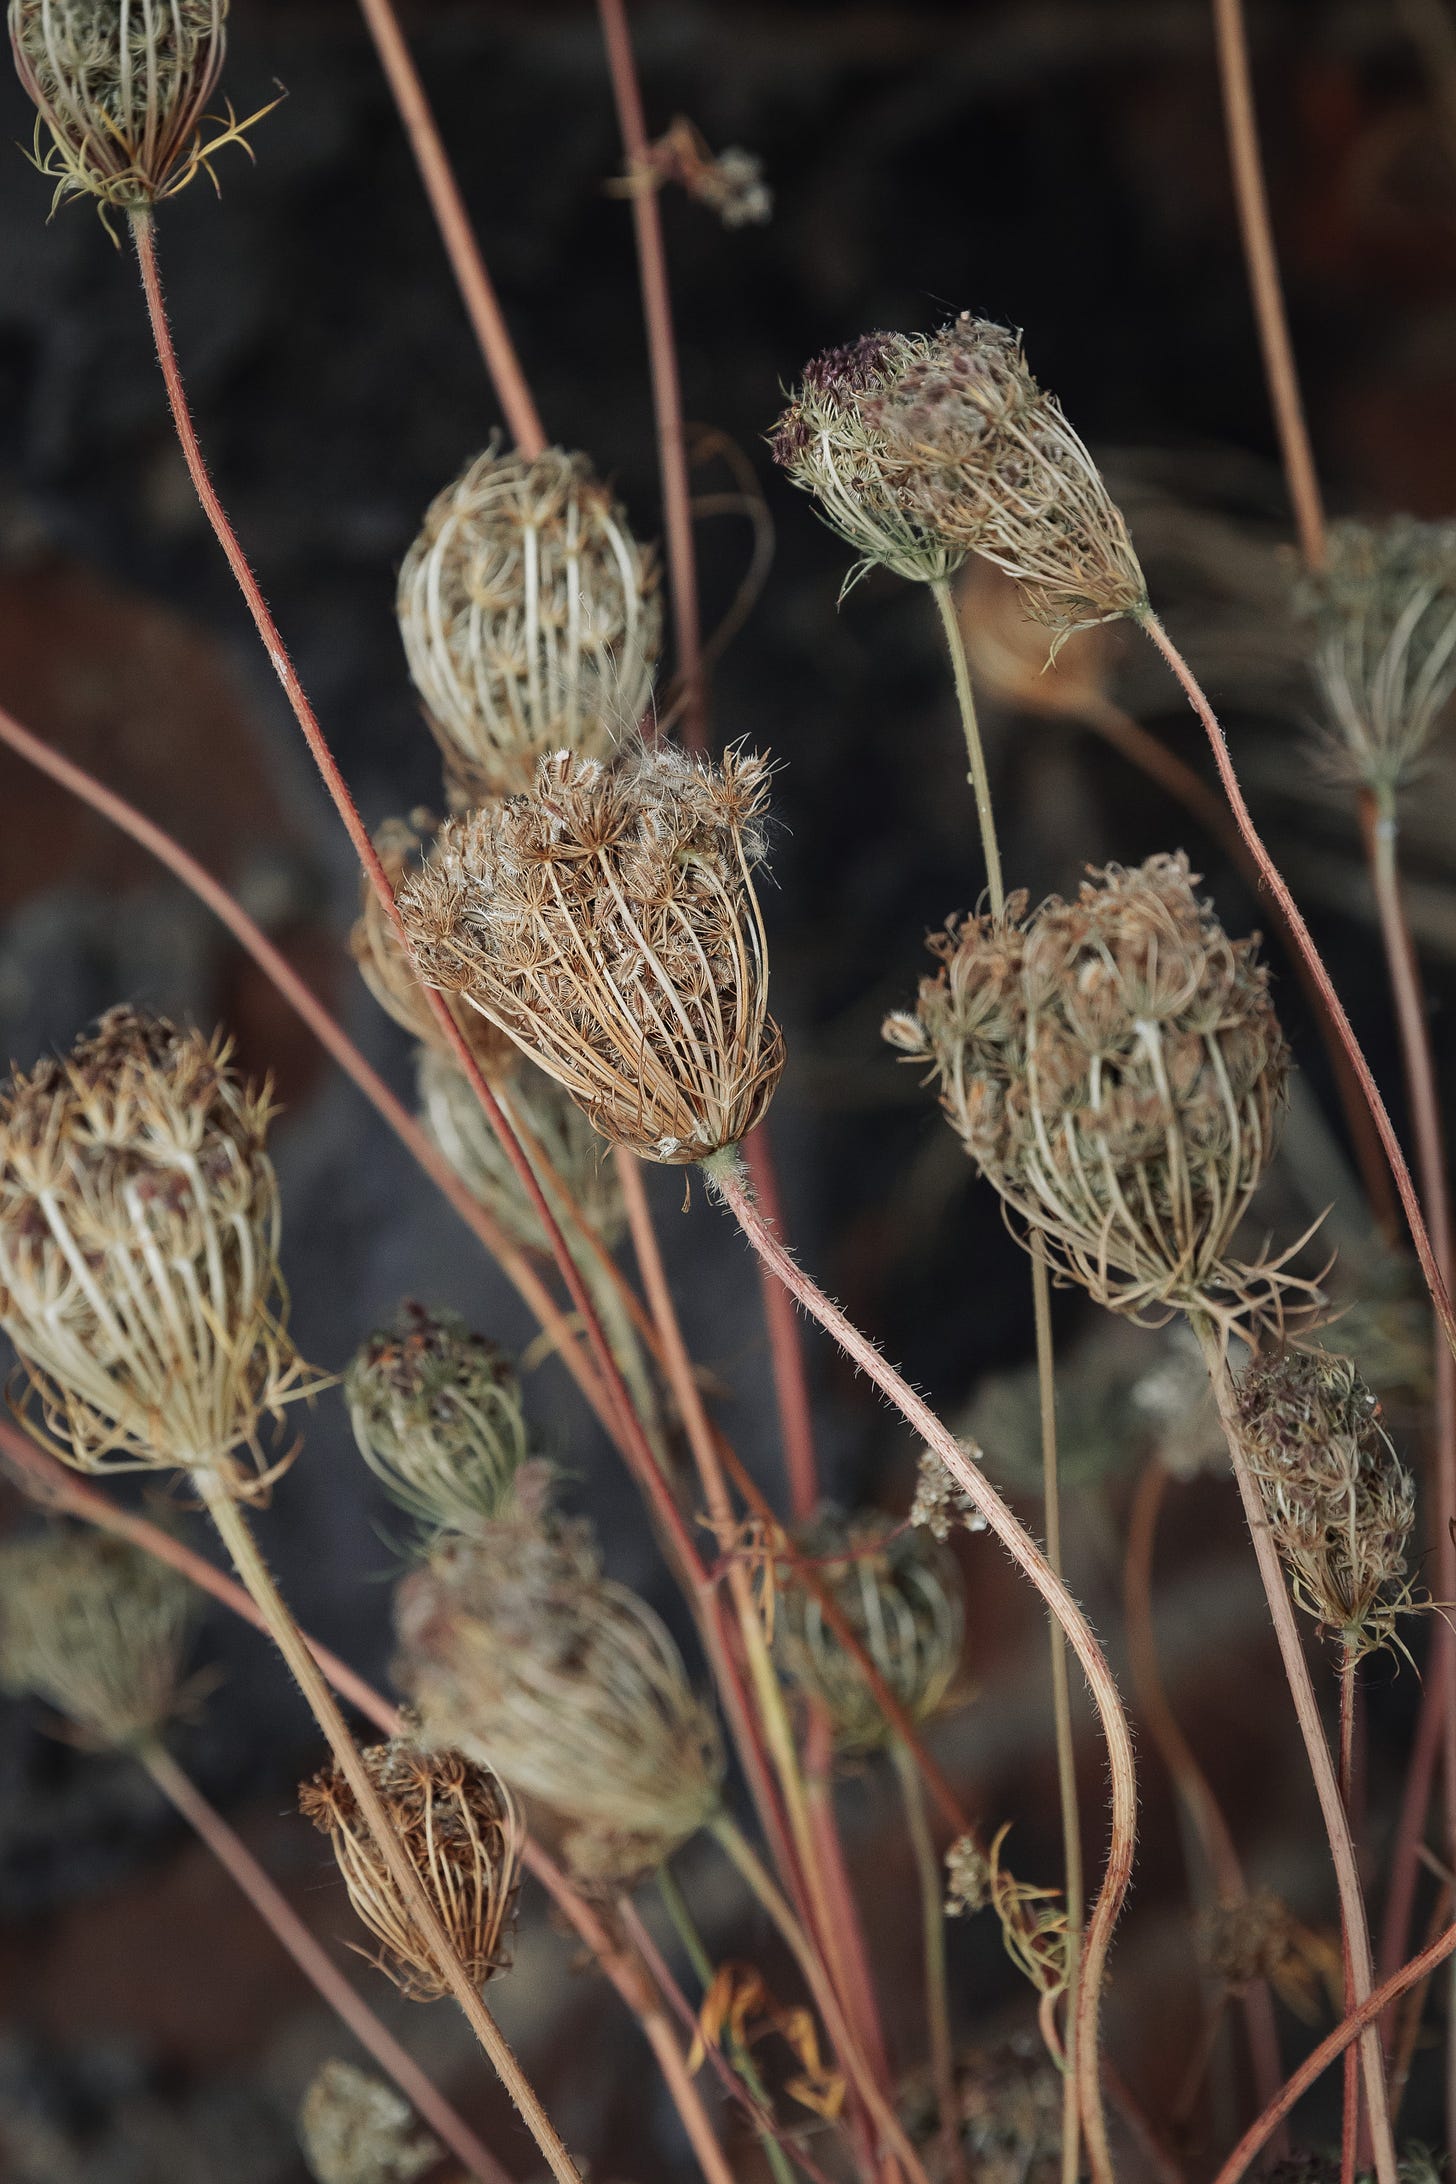 A close-up detail of seed heads.